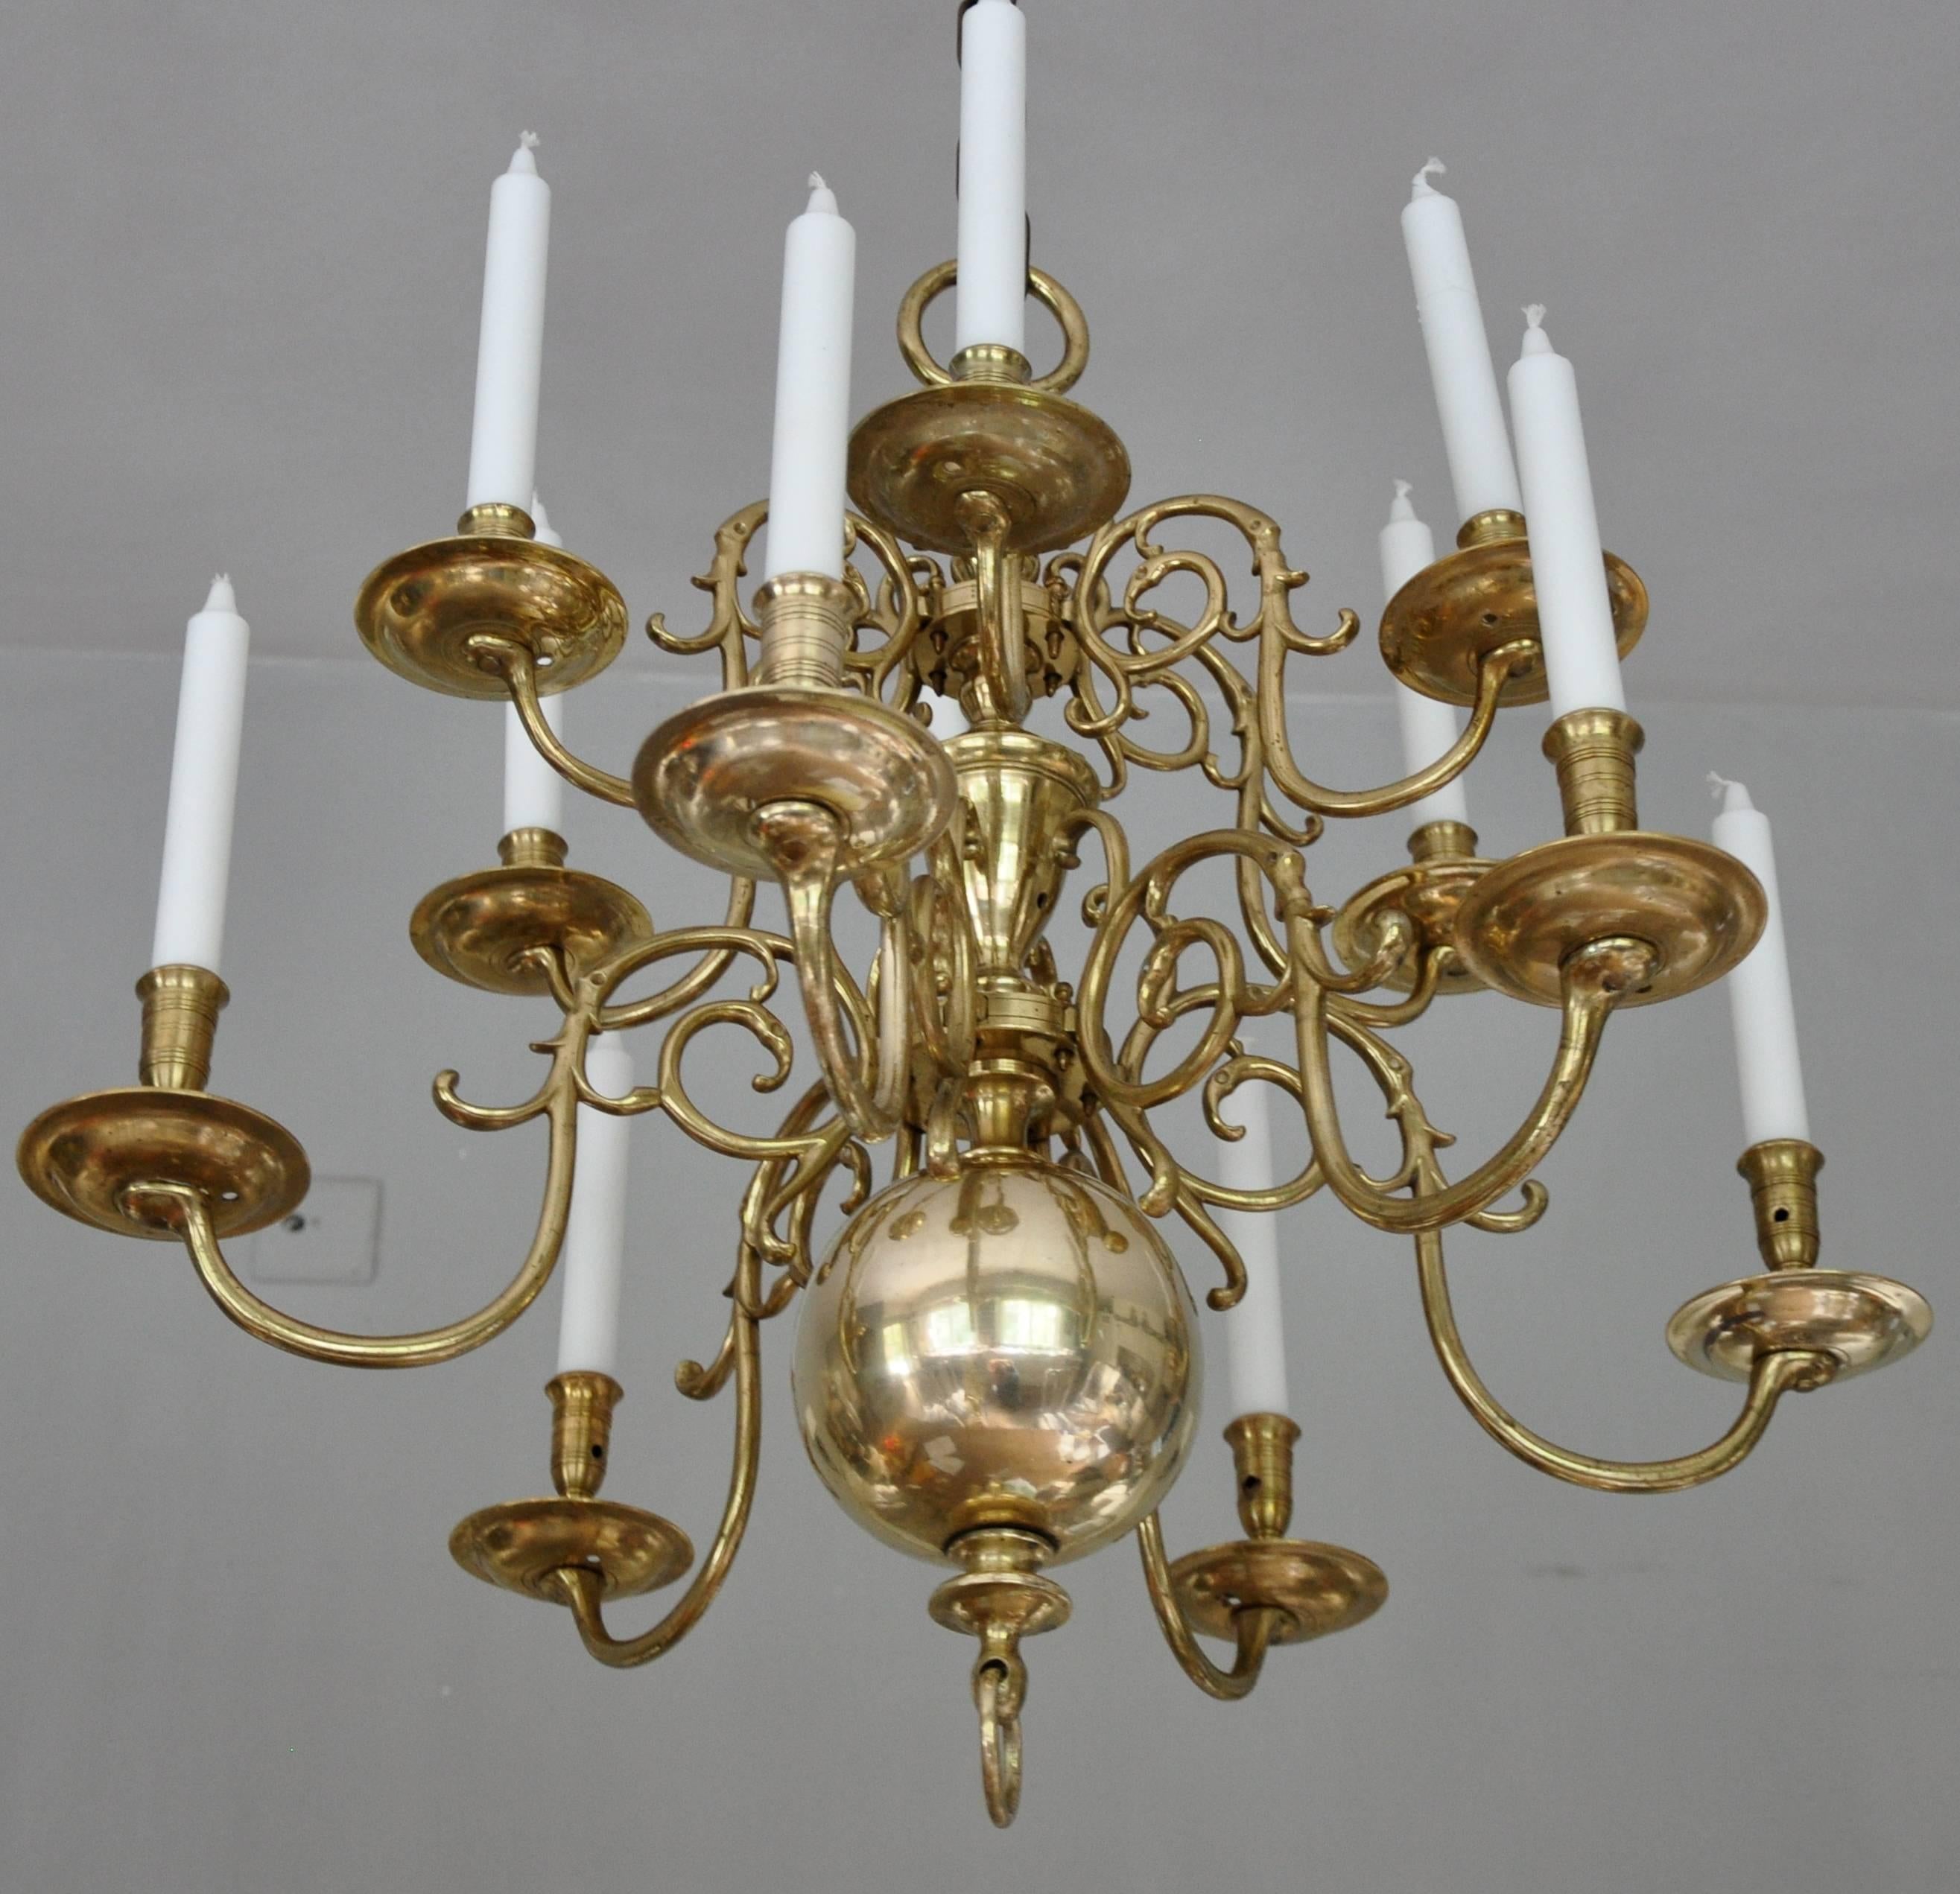 Twelve-light Dutch brass so called "ball" chandelier with two tiers of pegged S-shaped branches, a ball and baluster stem. The chandelier has readily drilled holes for electricity. Good proportions and quality.